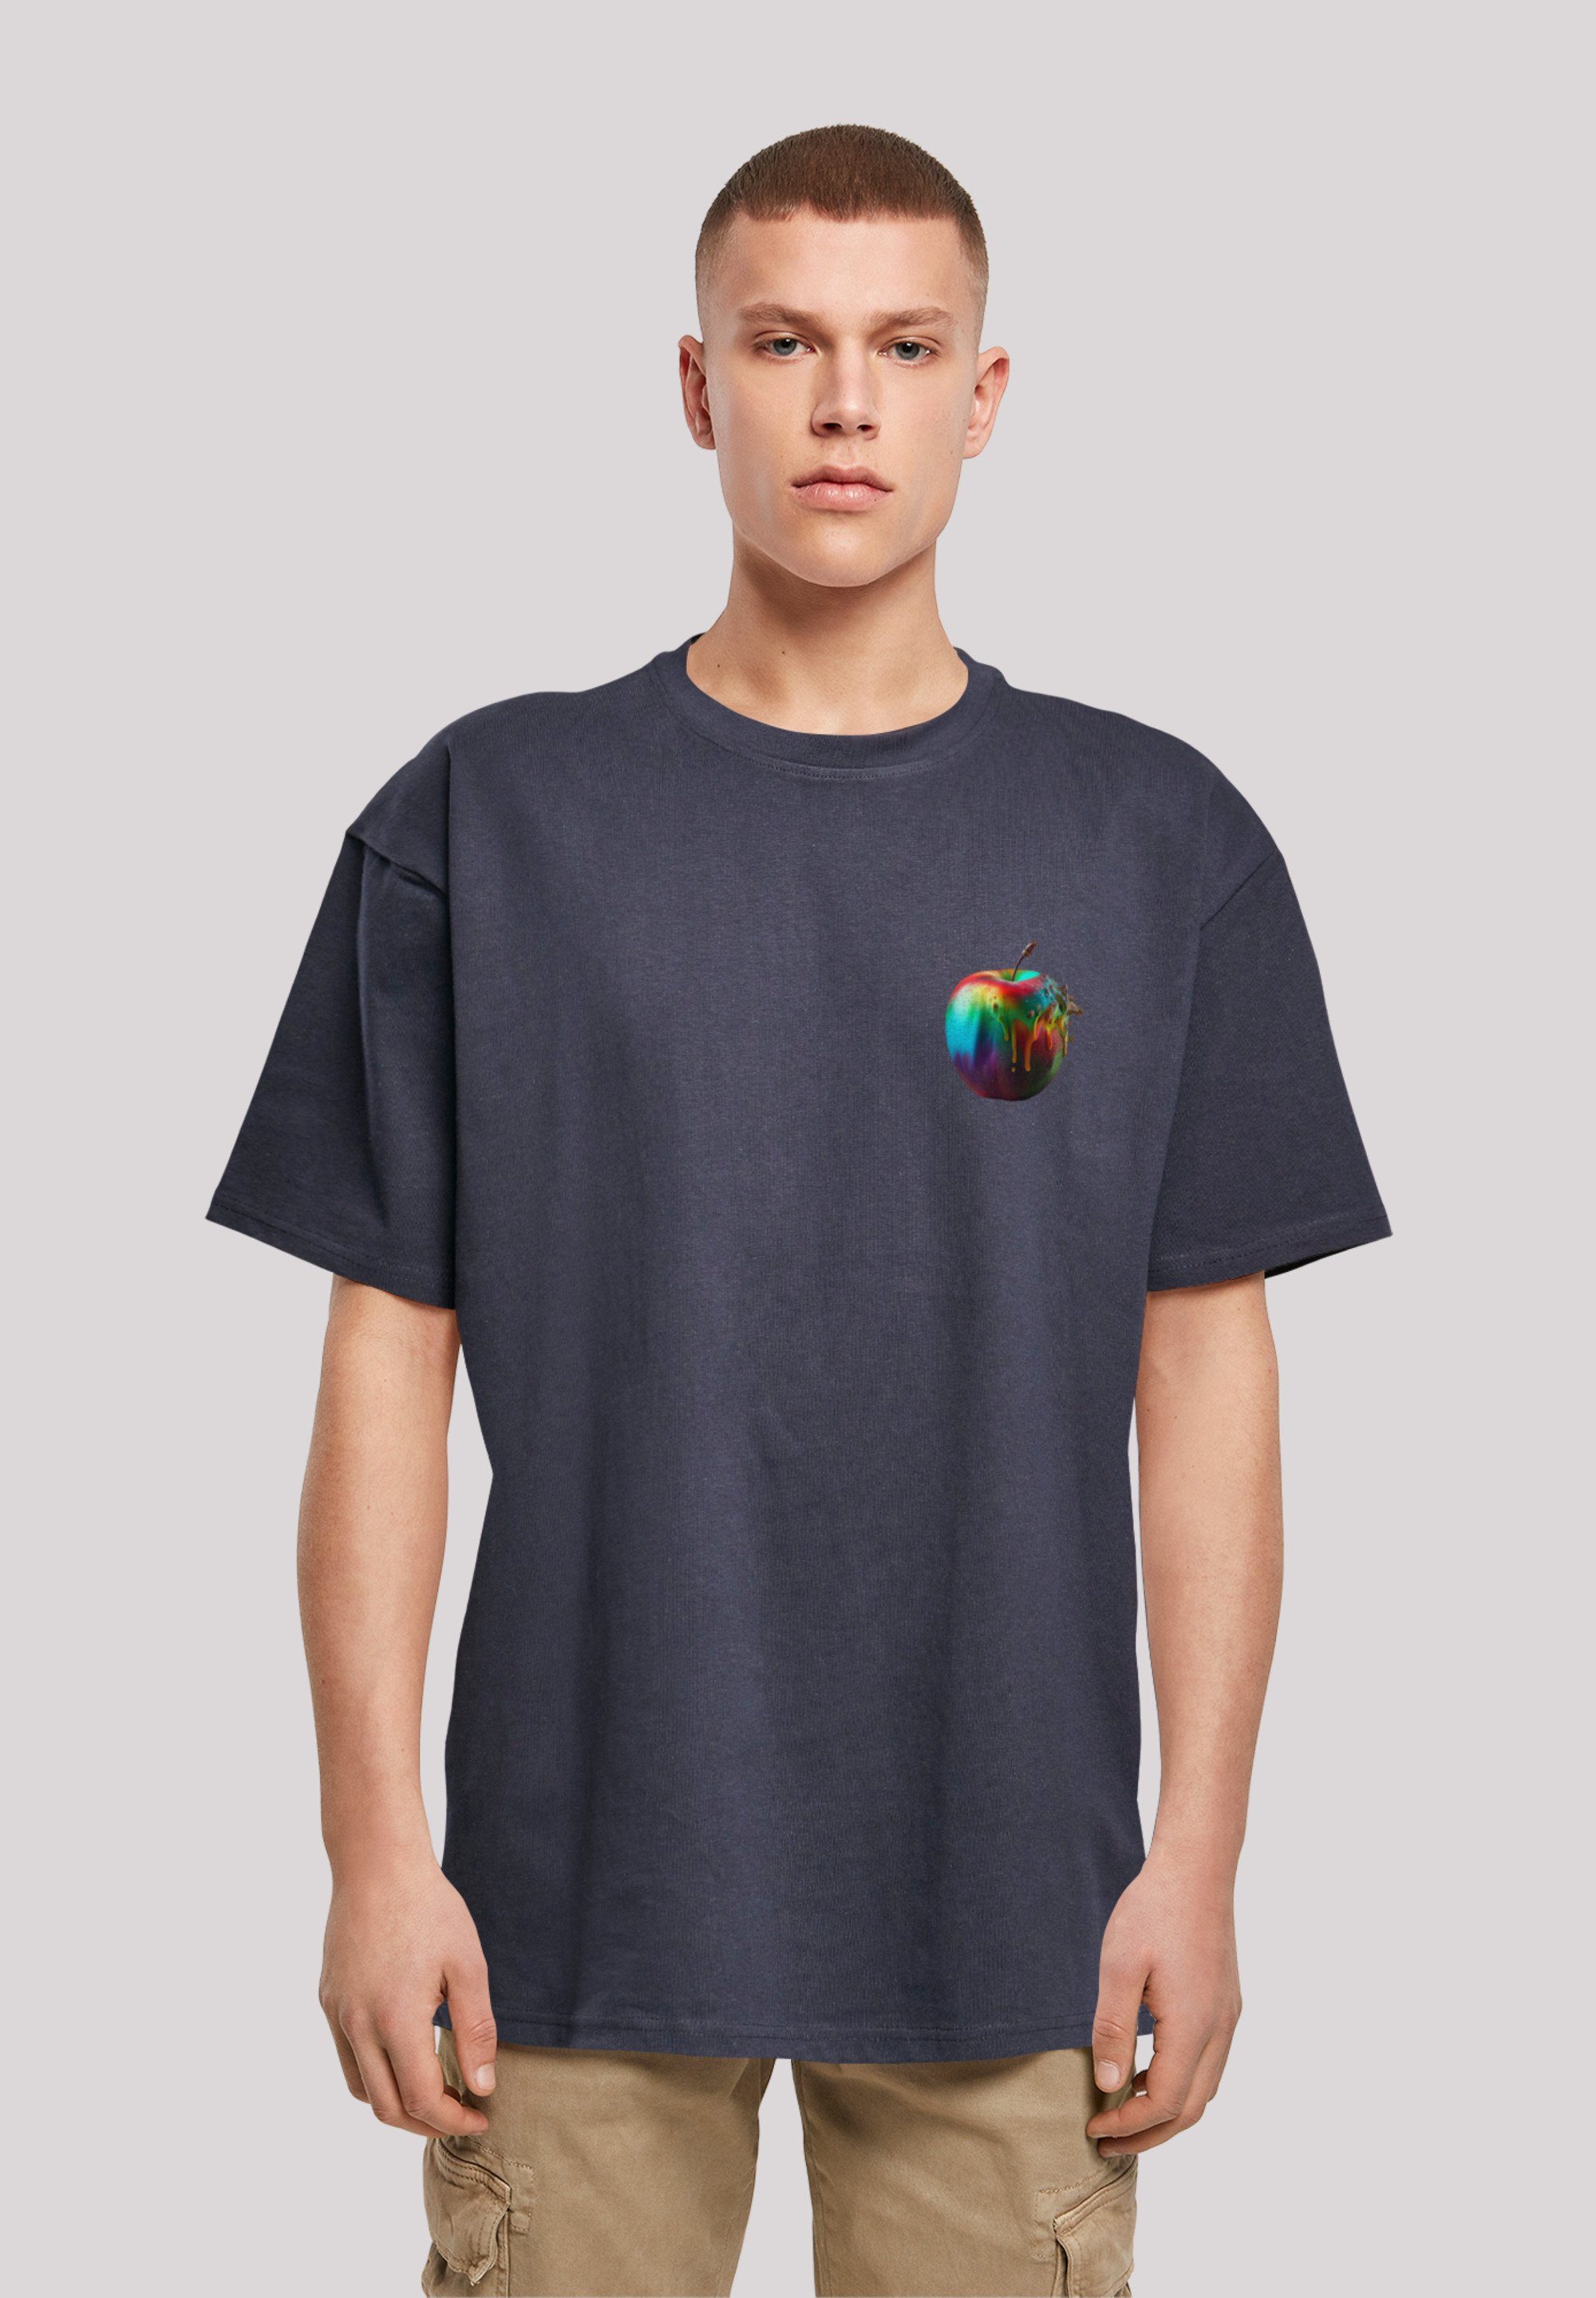 F4NT4STIC T-Shirt Colorfood Collection - Rainbow Apple Print navy